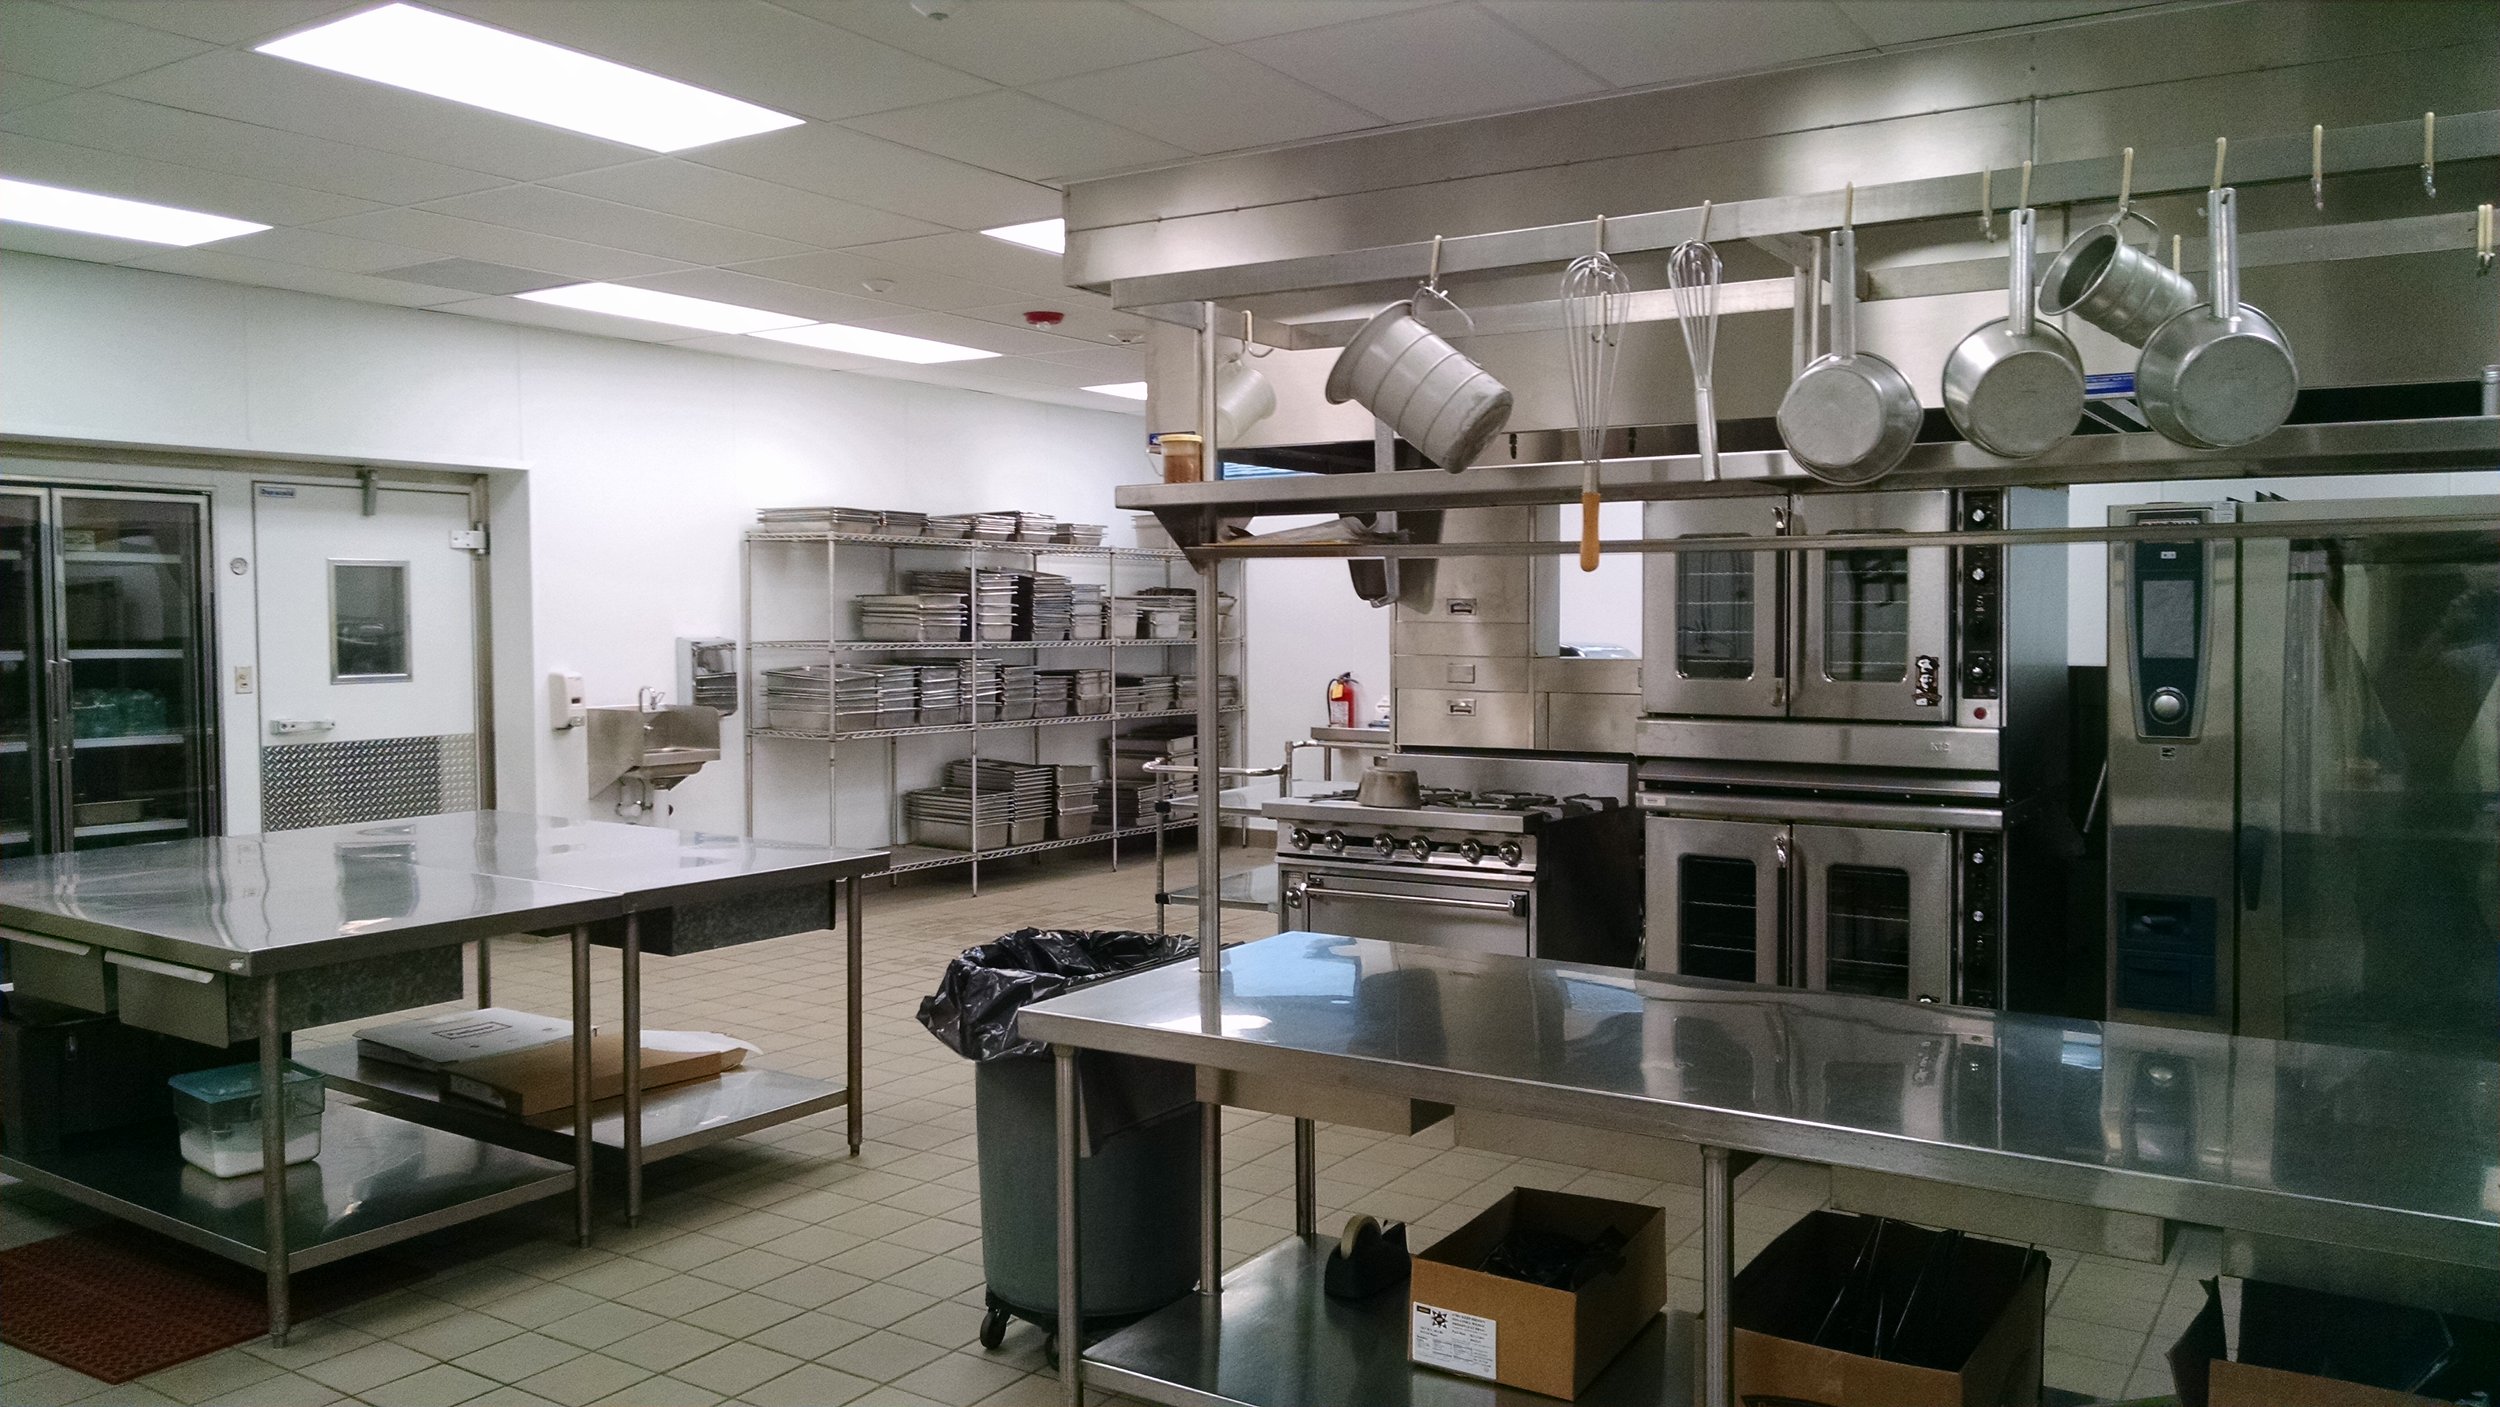 HANFORD CENTRAL KITCHEN FACILITY